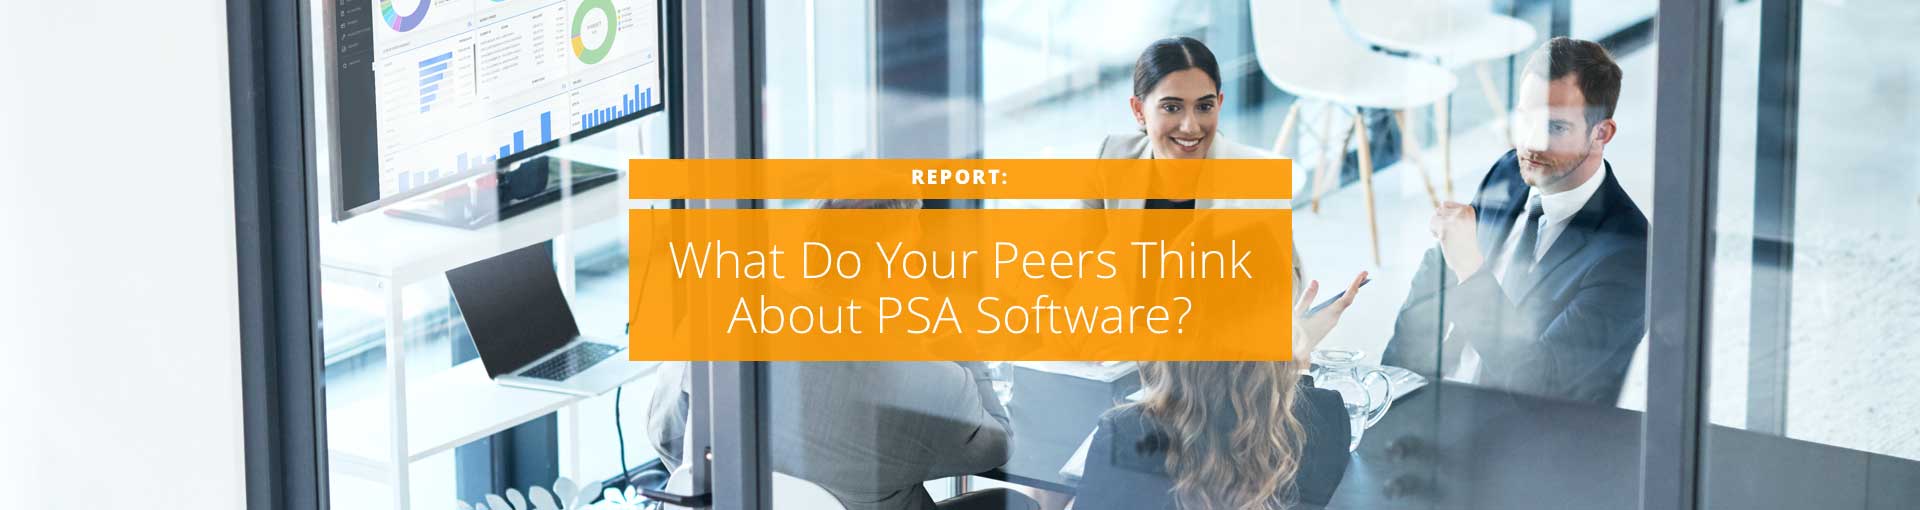 Report: What Do Your Peers Think About PSA Software? Featured Image